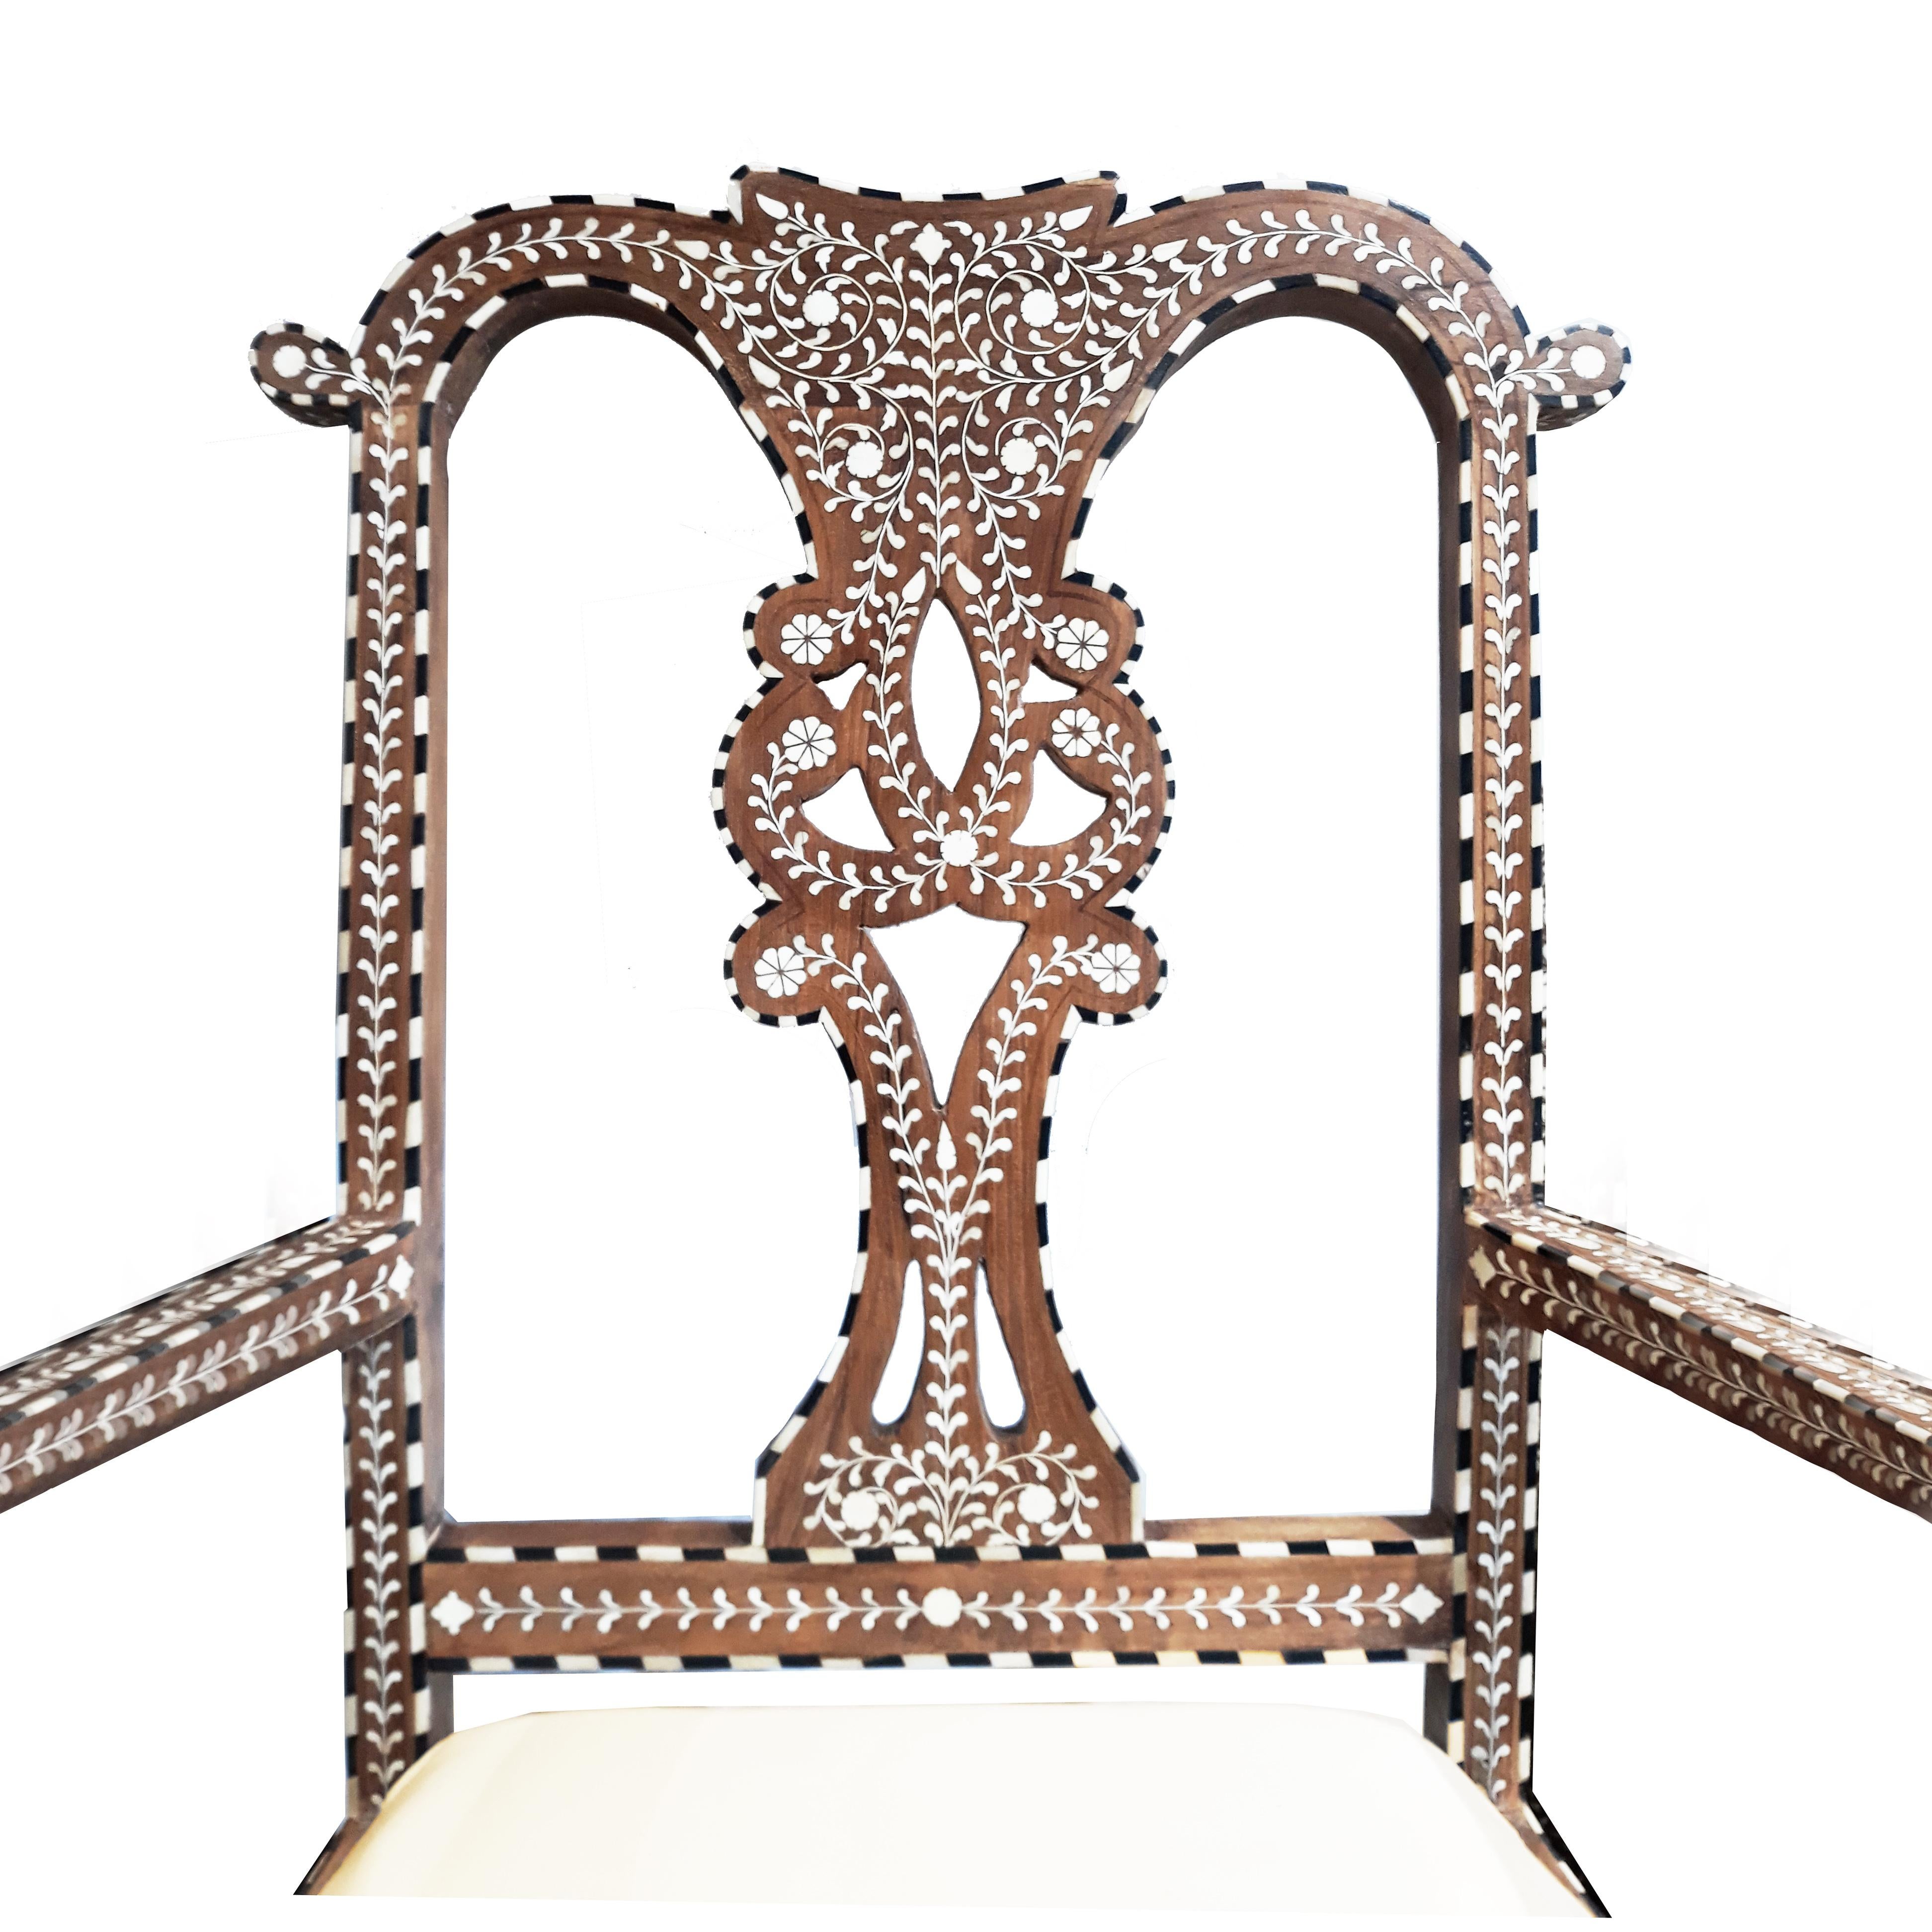 Hand-Crafted Bone-Inlaid Armchair from India